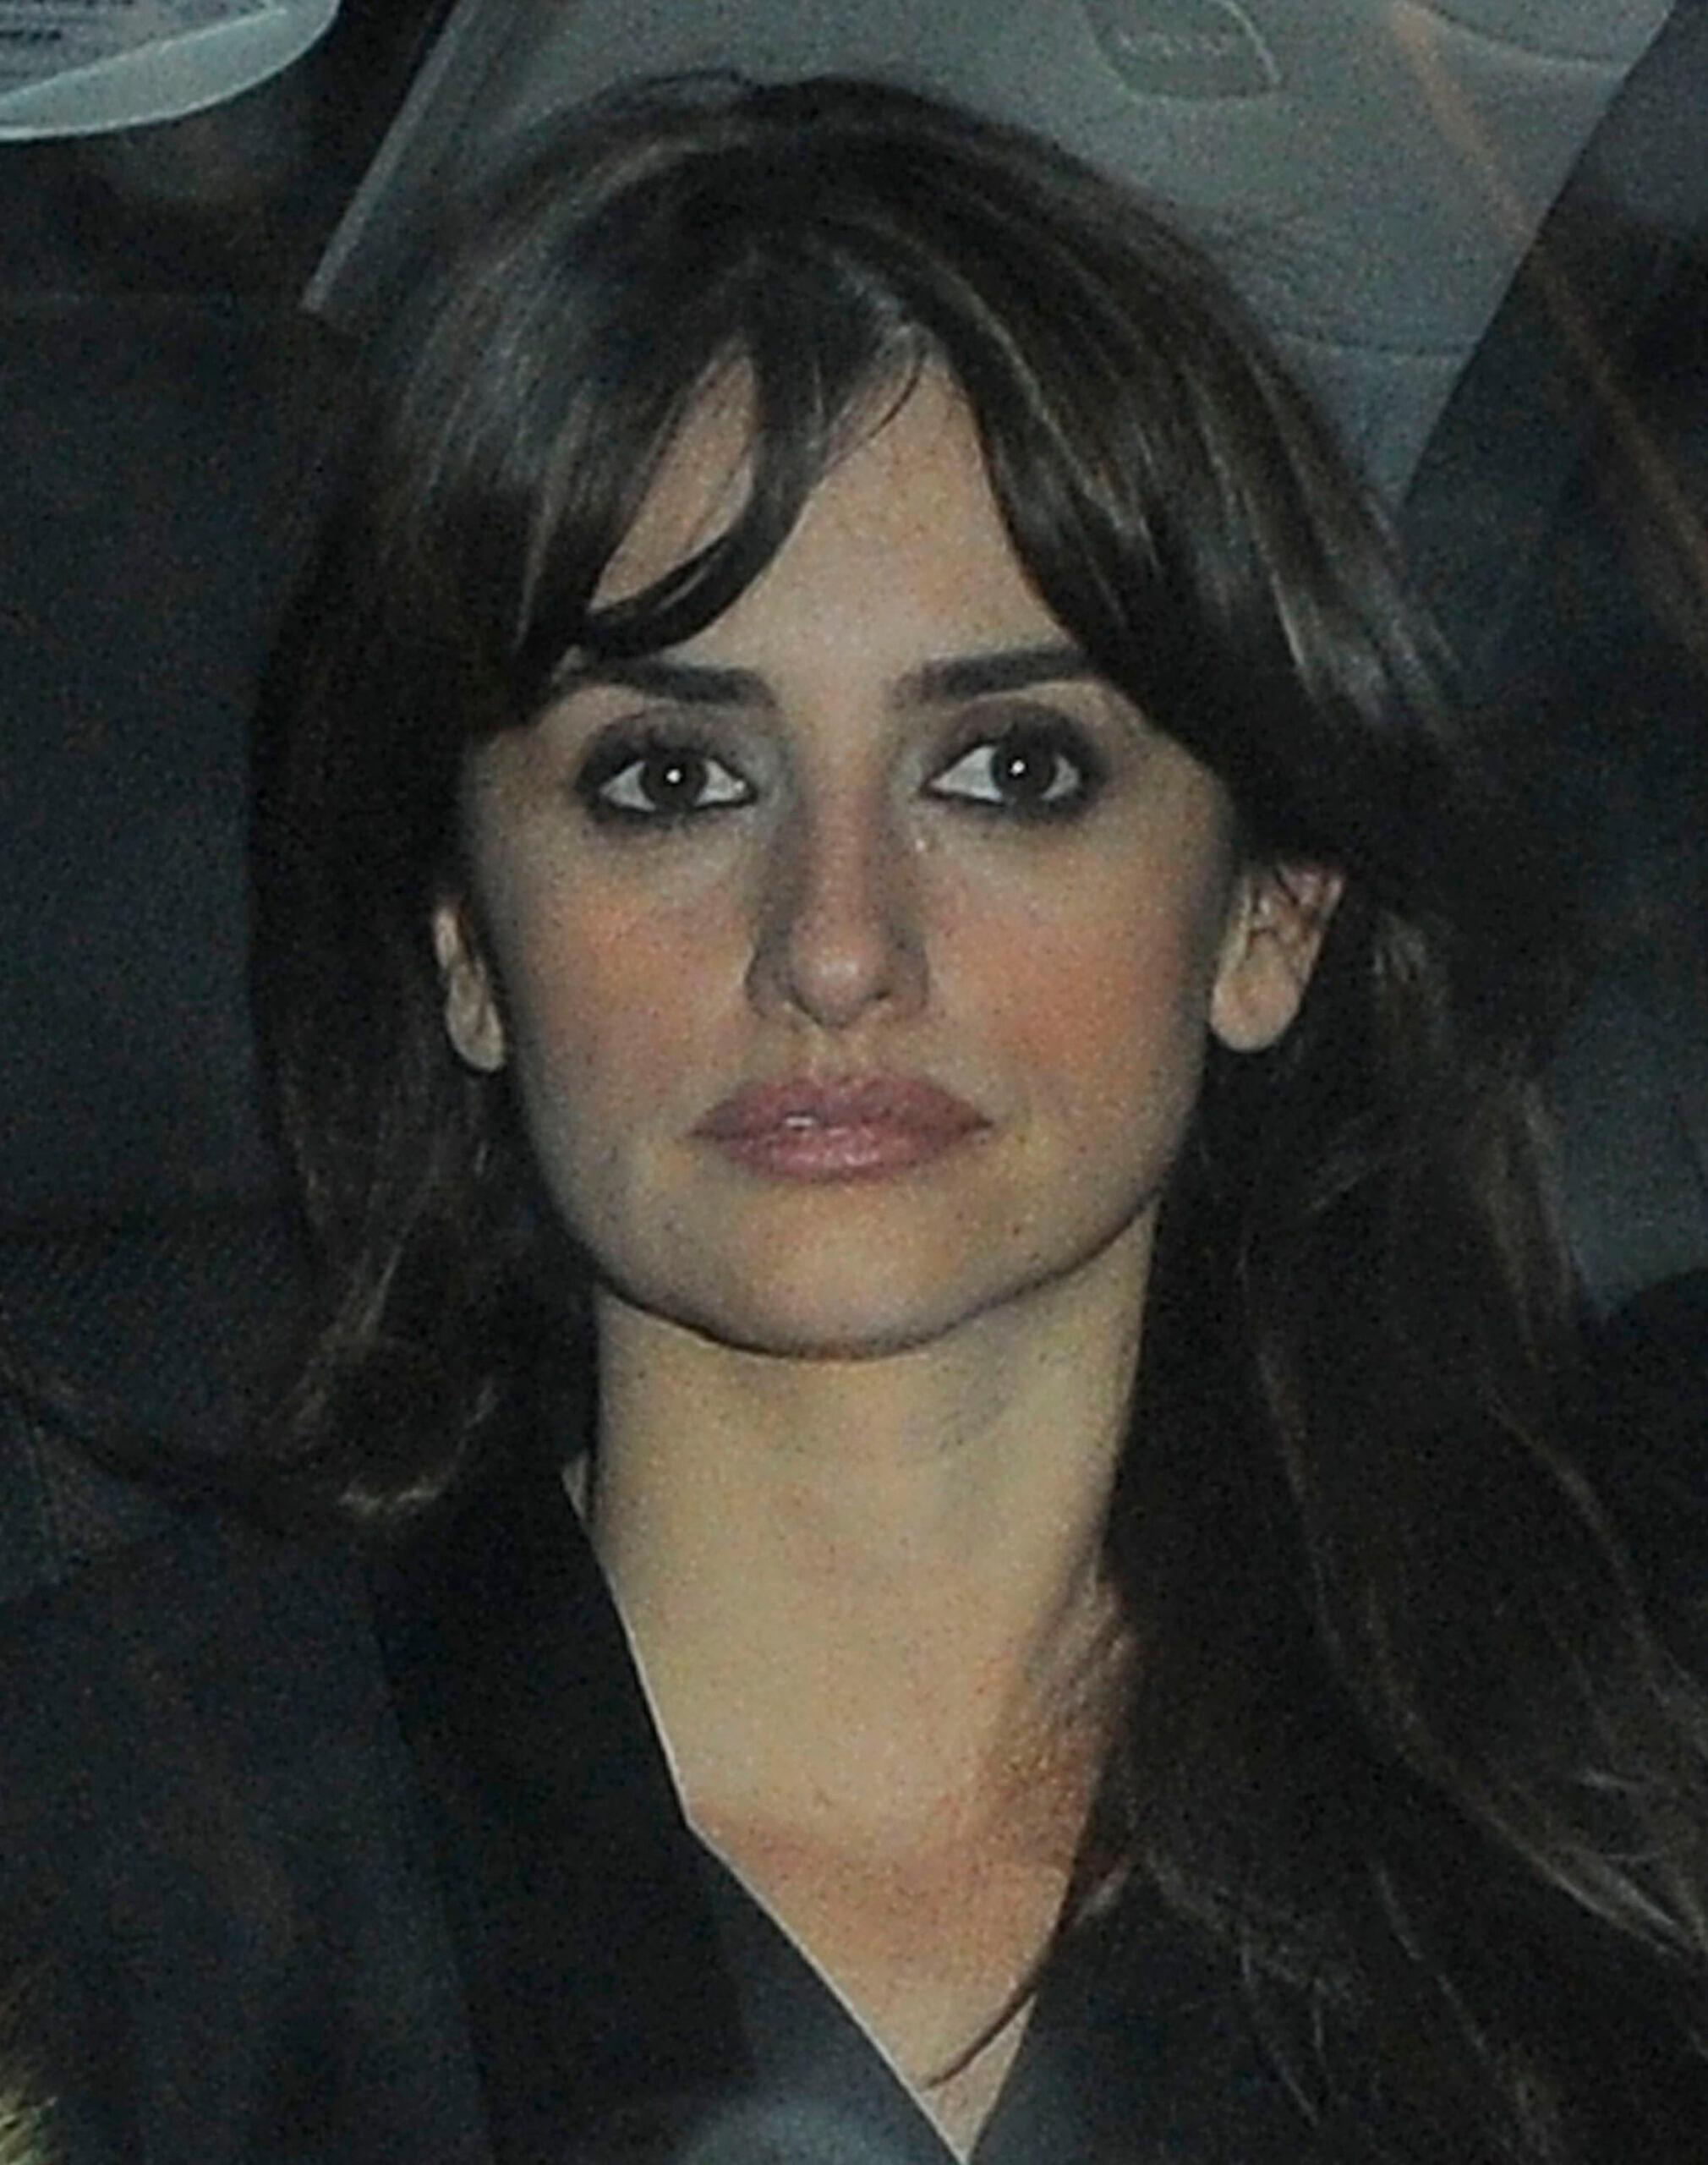 Penelope Cruz leaving The May Fair Hotel with Harvey Weinstein and heading to Cipriani restaurant